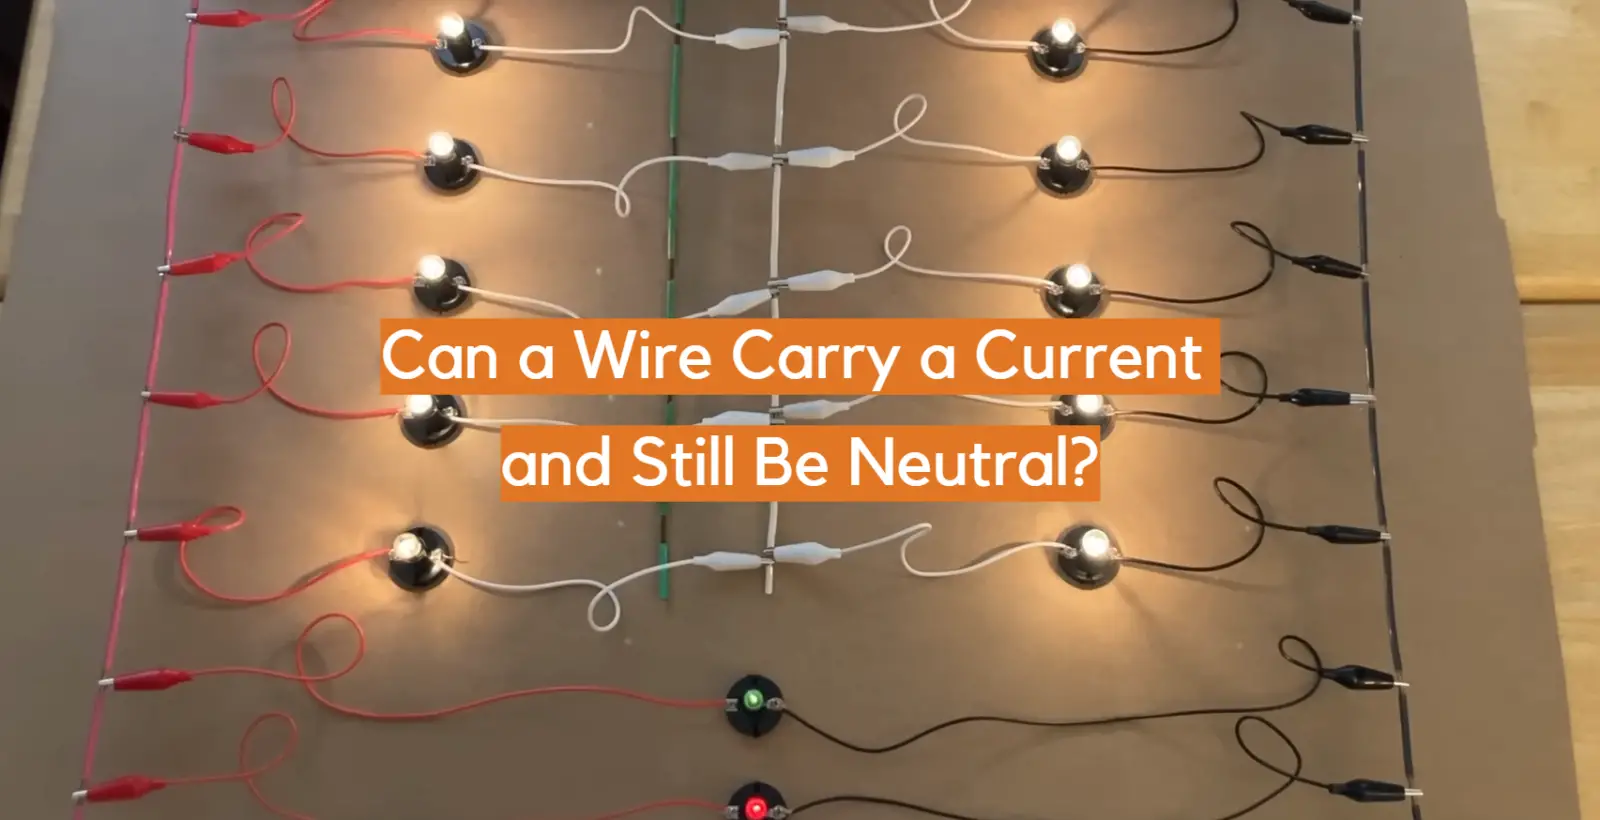 Can a Wire Carry a Current and Still Be Neutral?